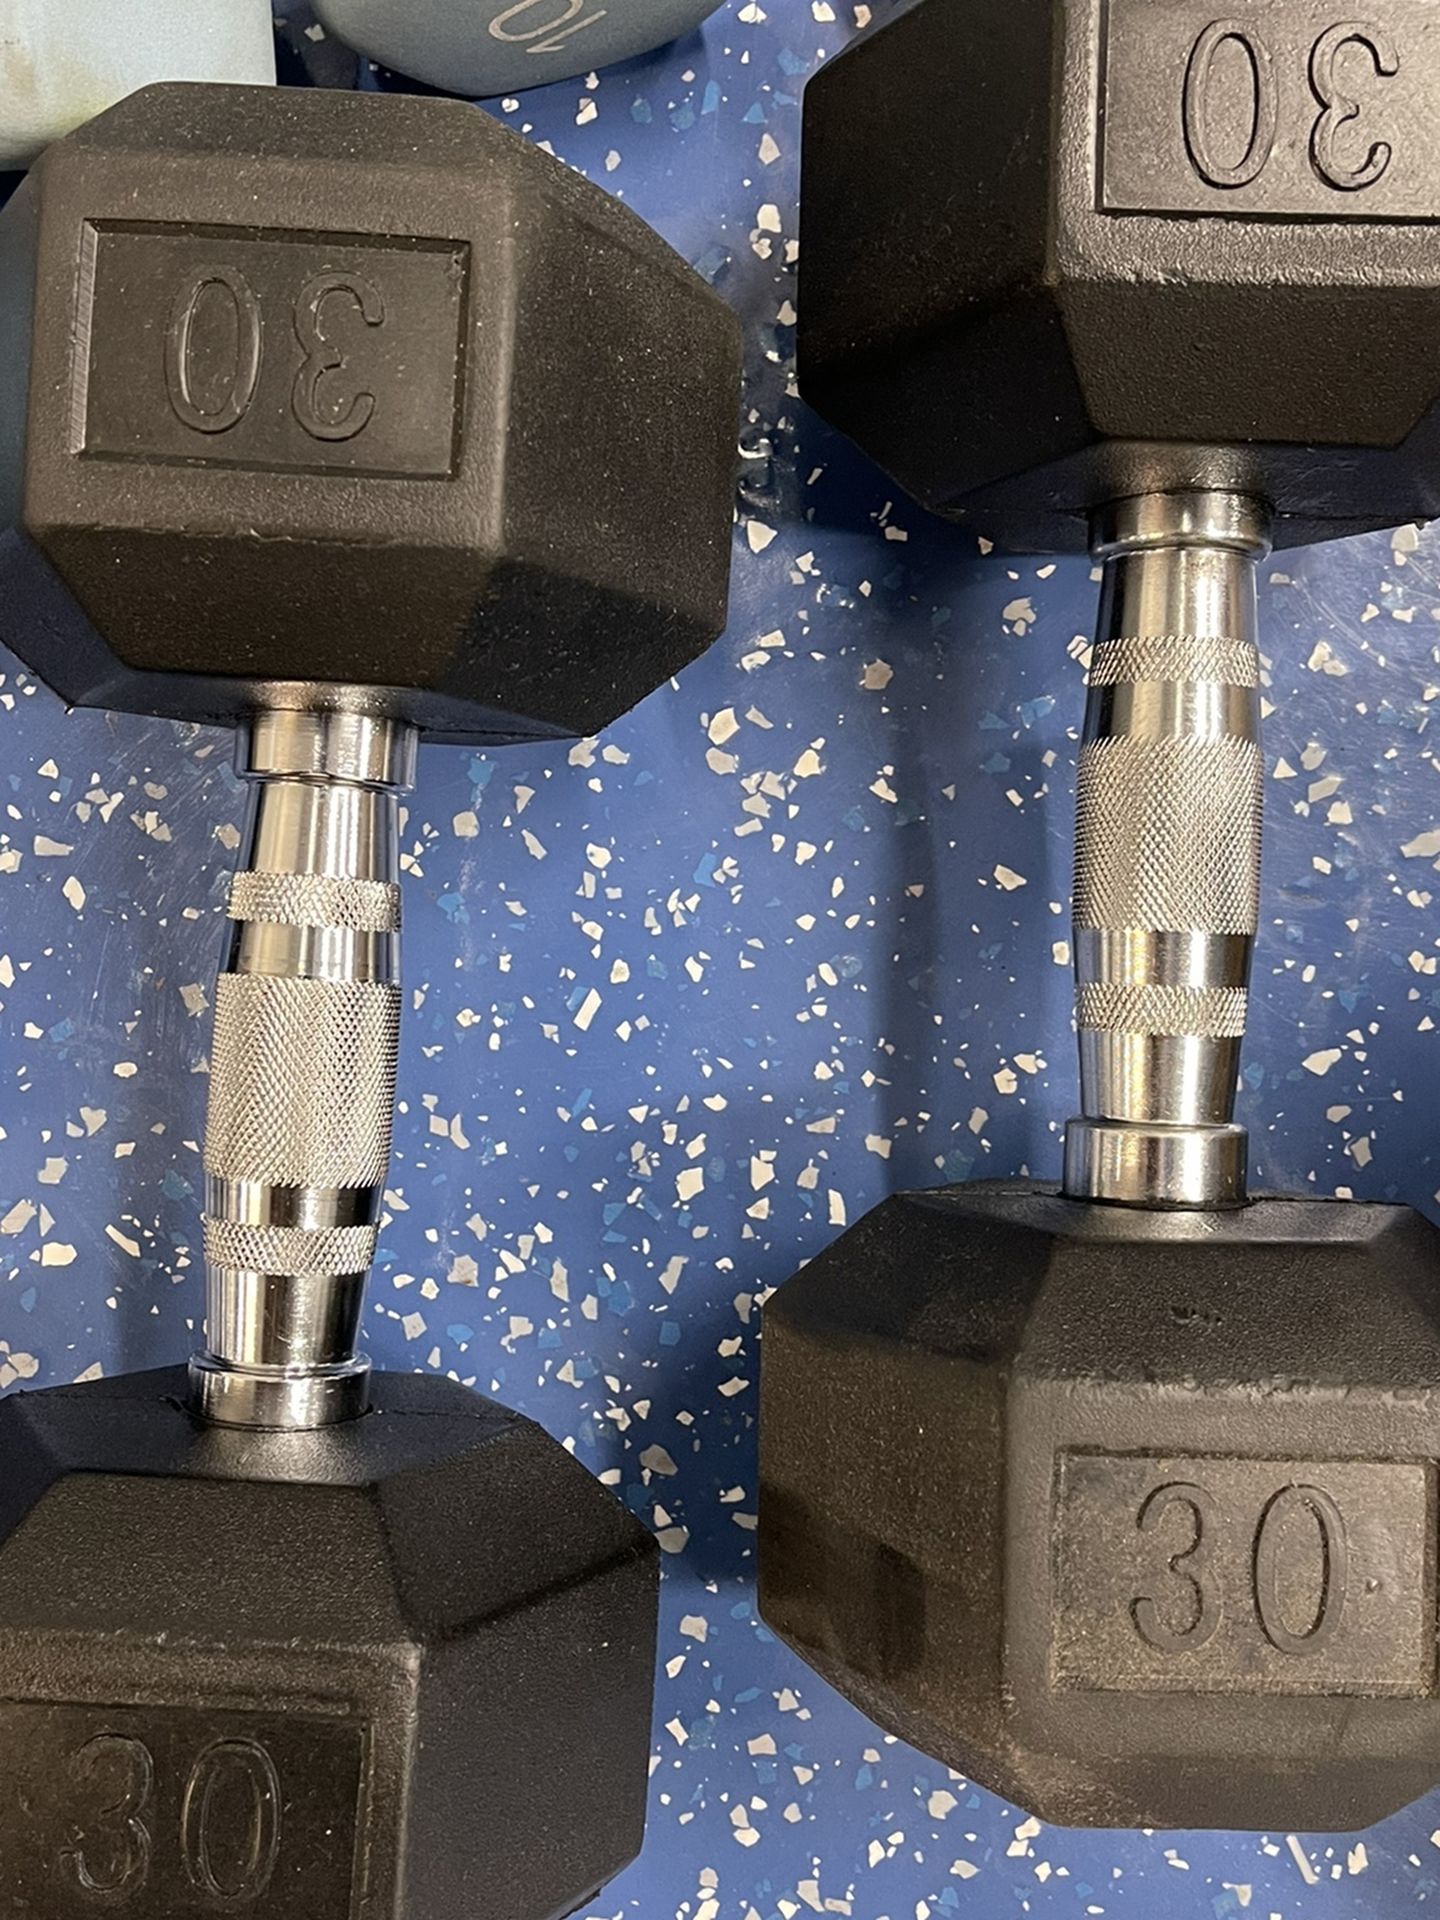 30lbs Unmarked Dumbbells Purchased From Rogue